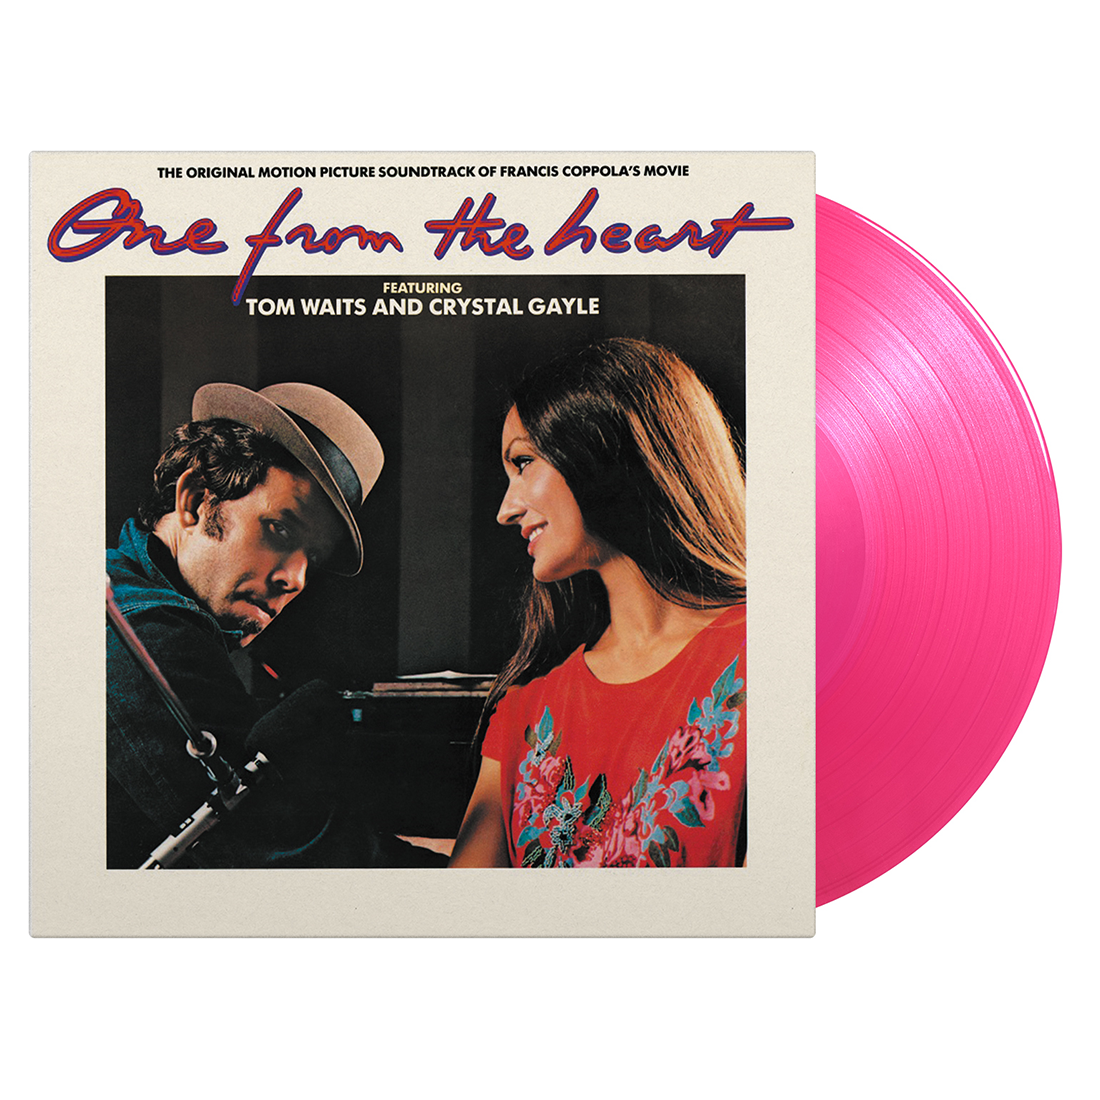 One From The Heart - Original Soundtrack: Limited Edition Translucent Pink Vinyl LP